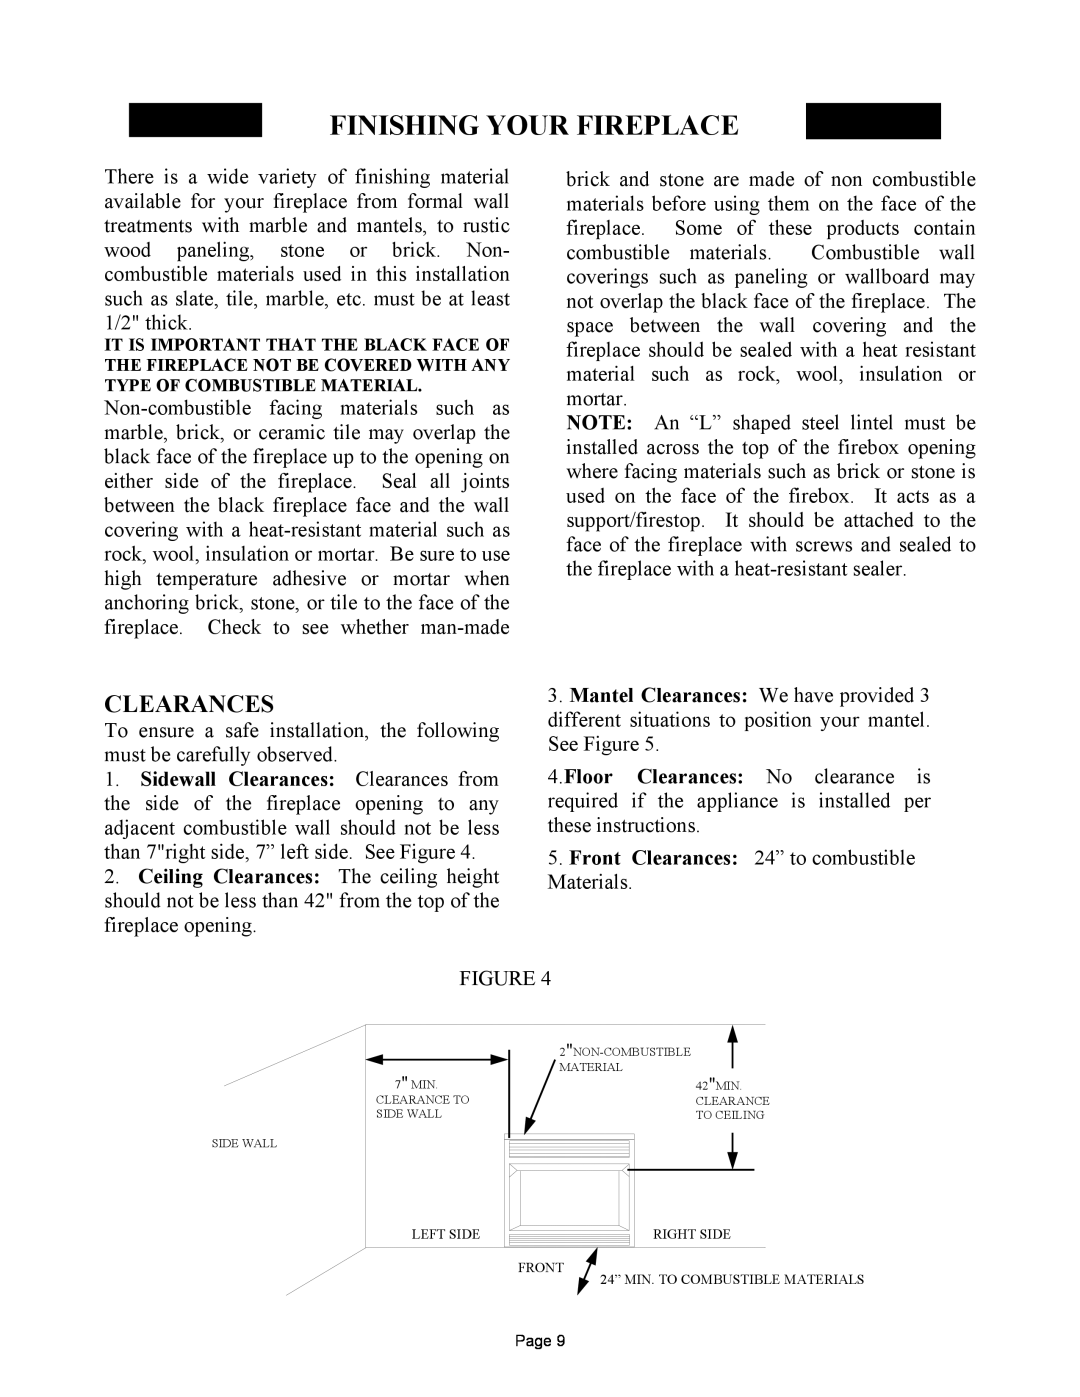 New Buck Corporation MODEL FP-327-ZC manual Finishing Your Fireplace, Clearances 